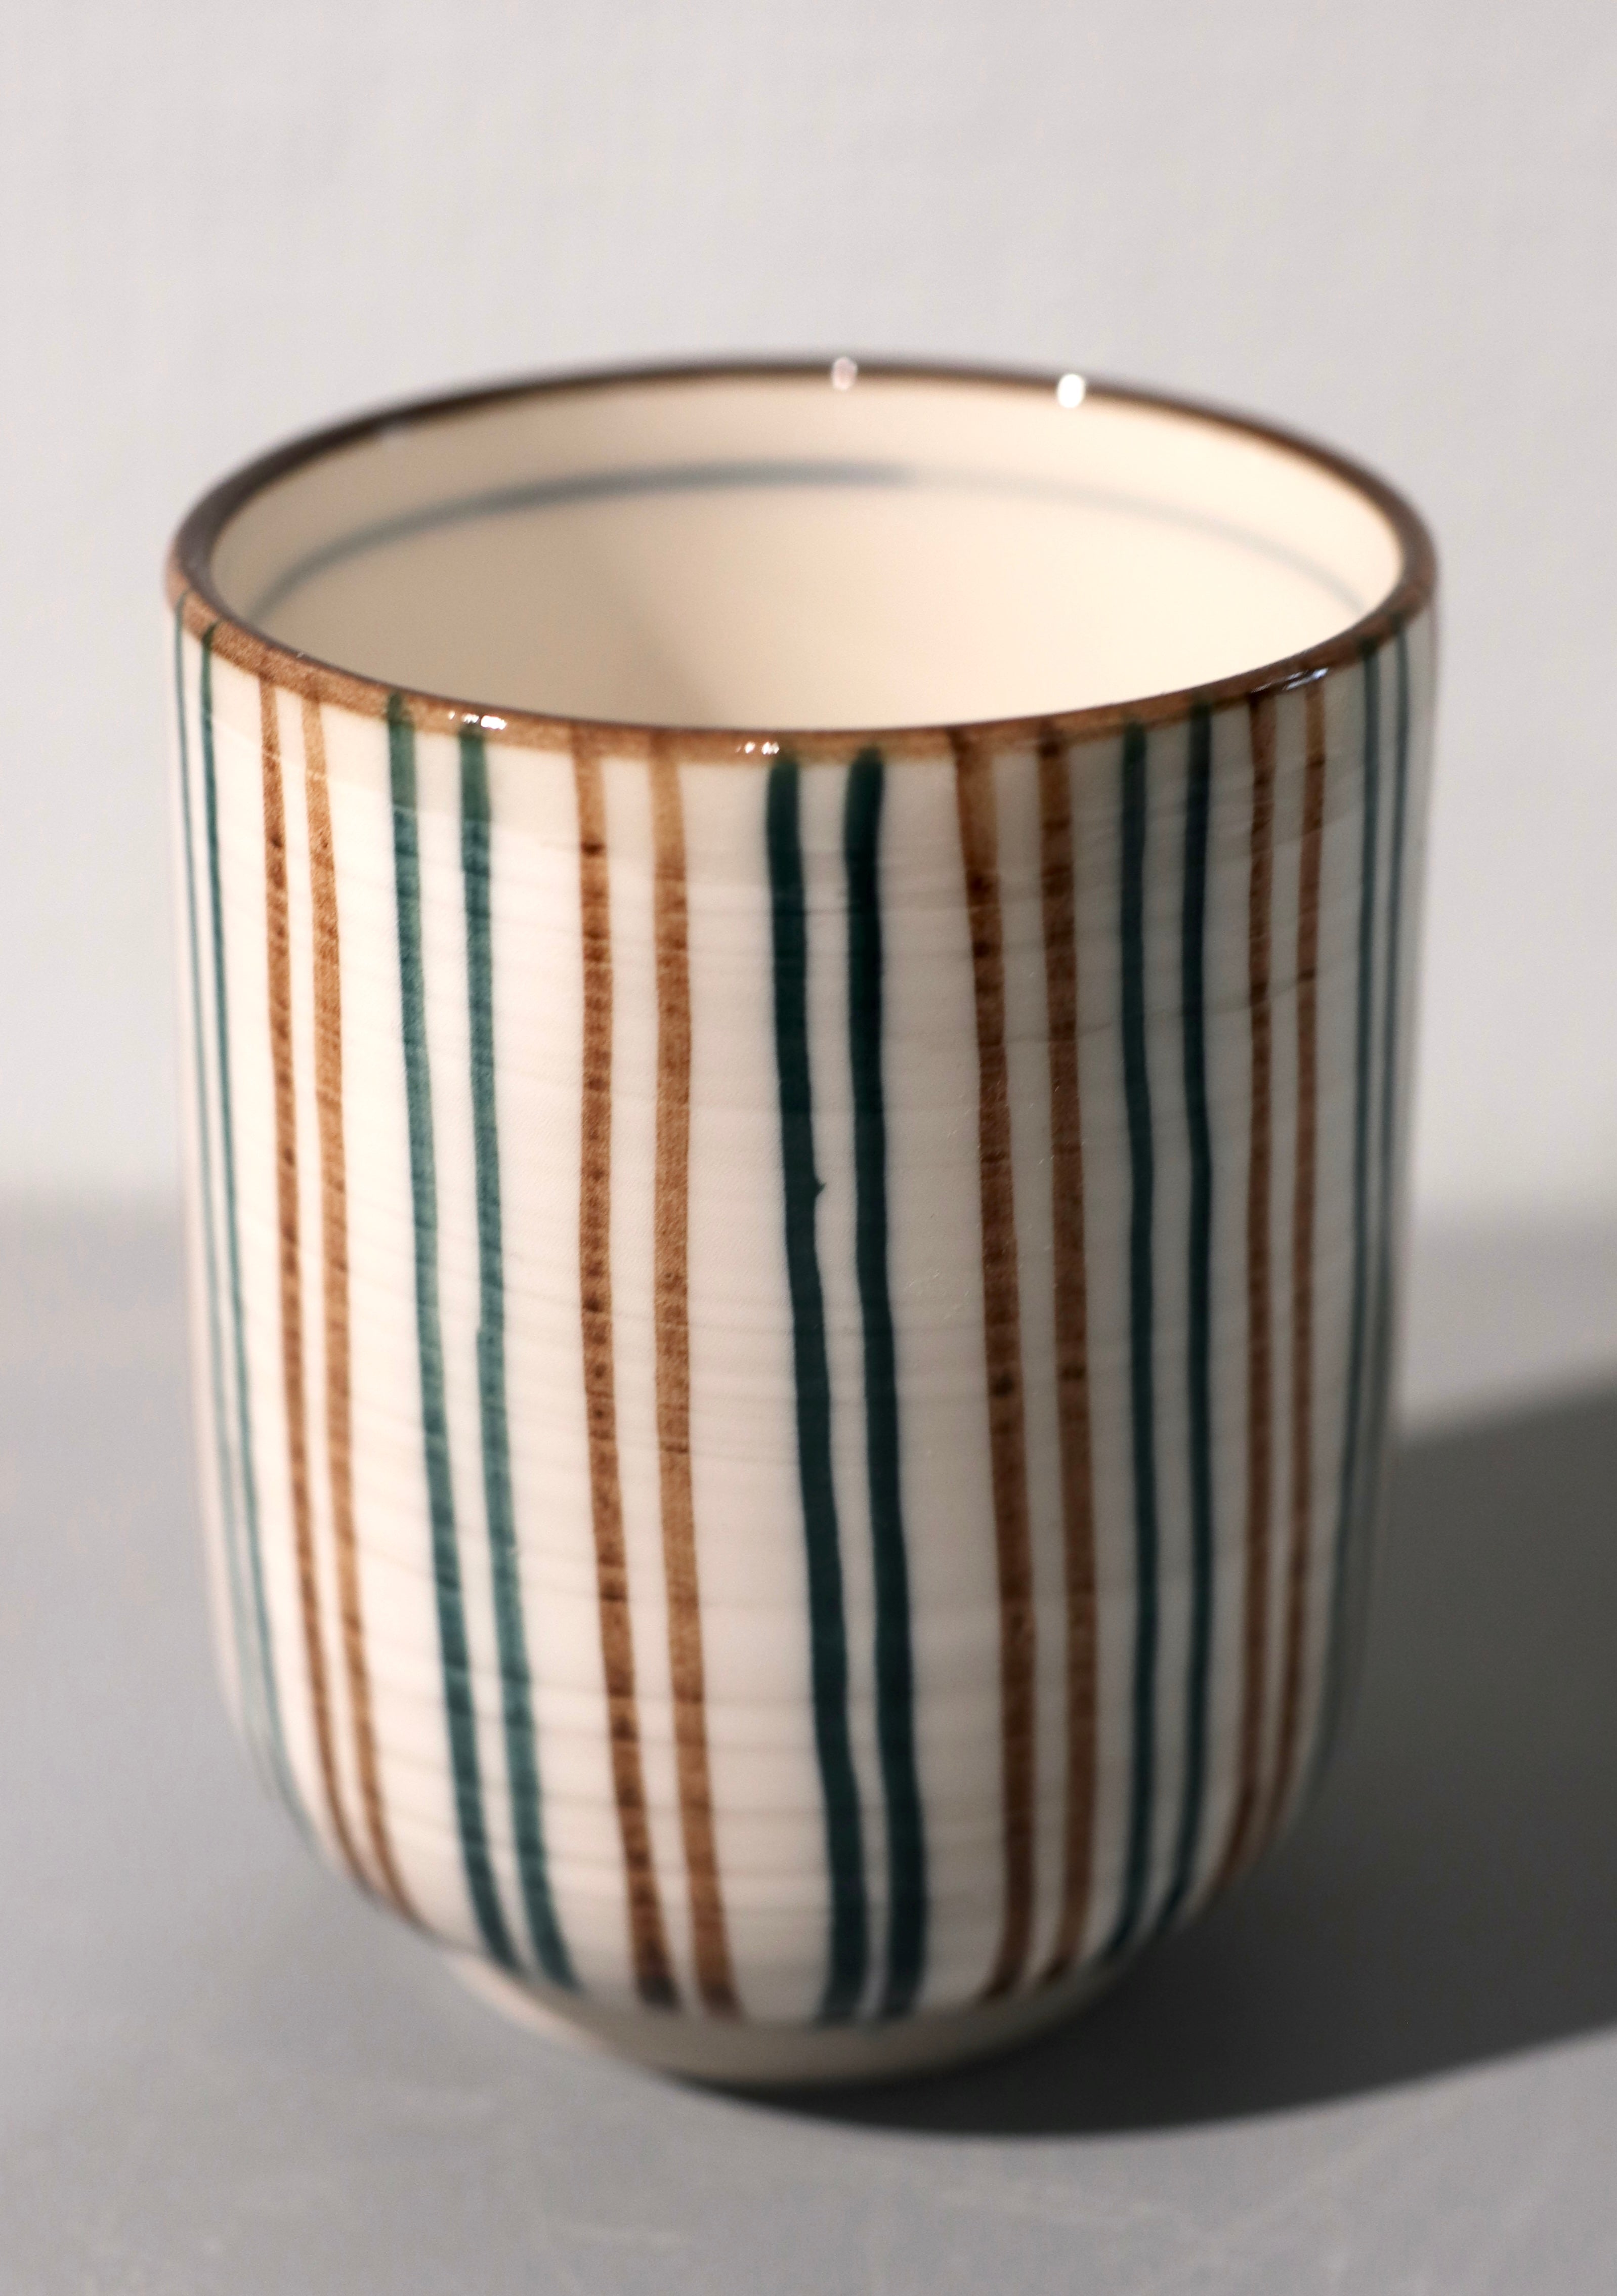 Narrow cup with brown and green stripes